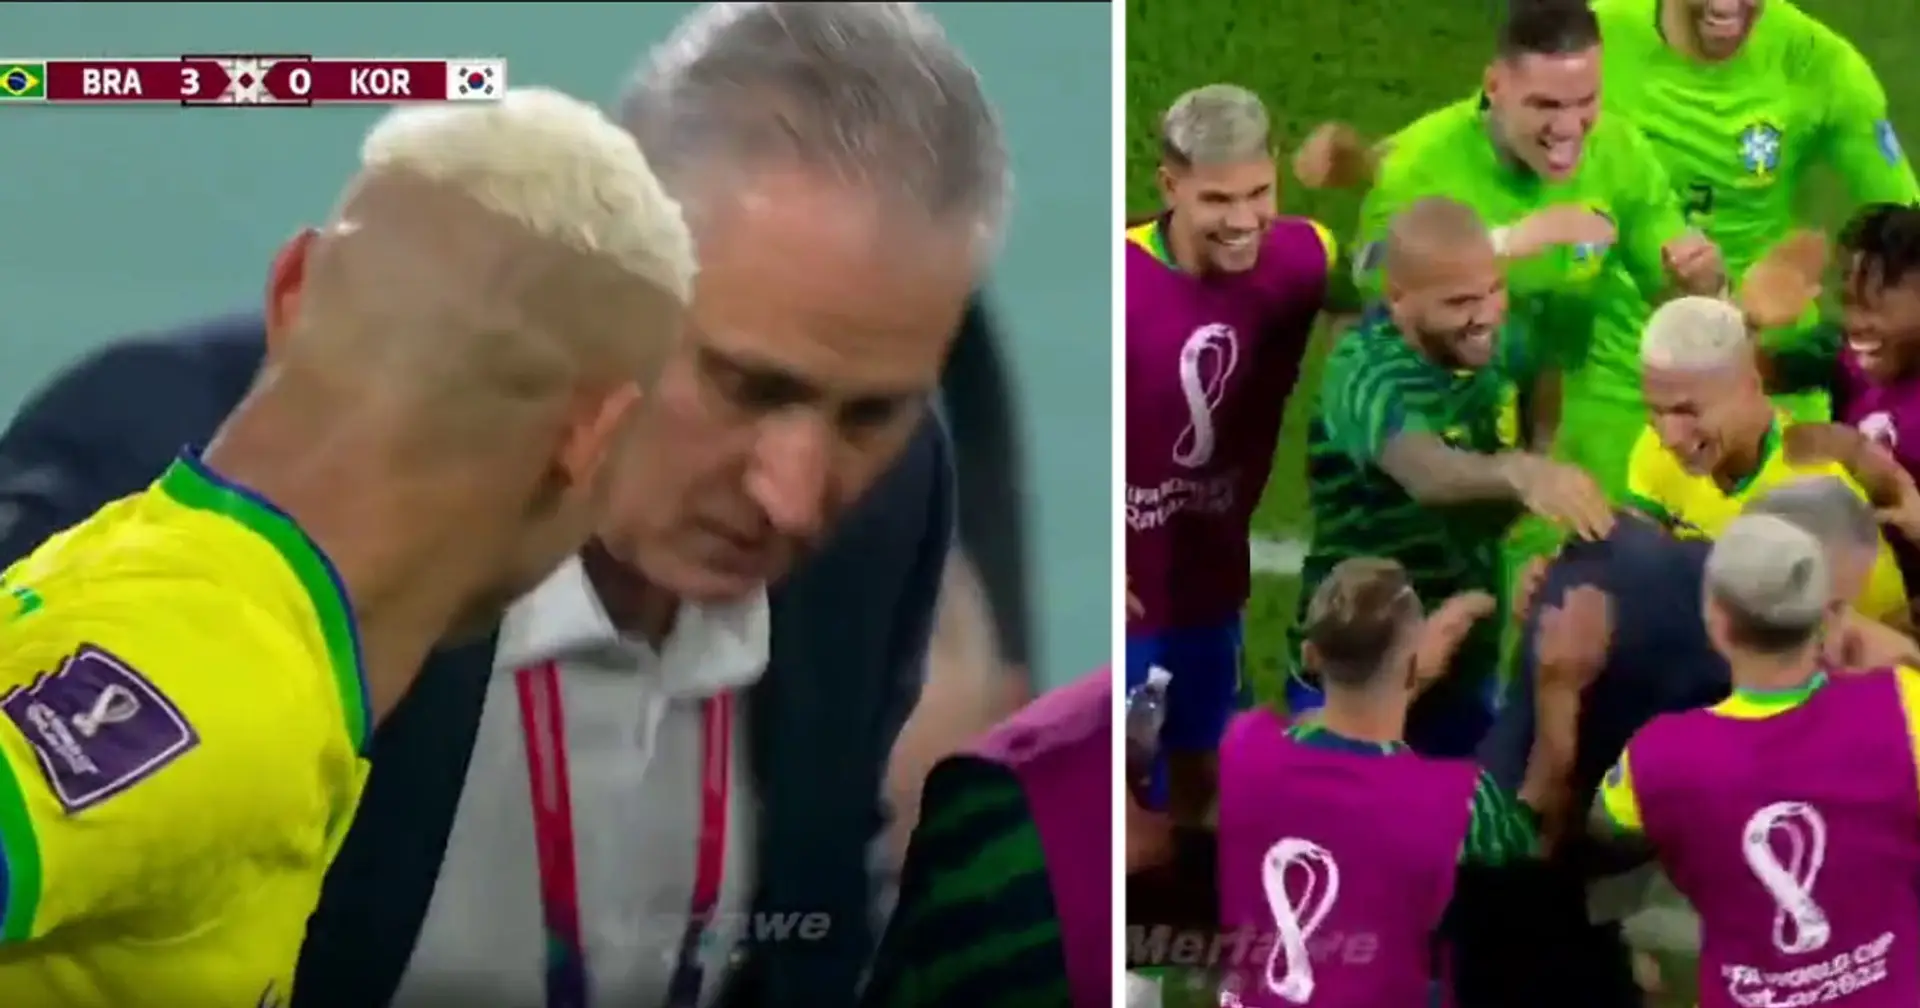 Brazil coach Tite dances with Dani Alves and co at World Cup